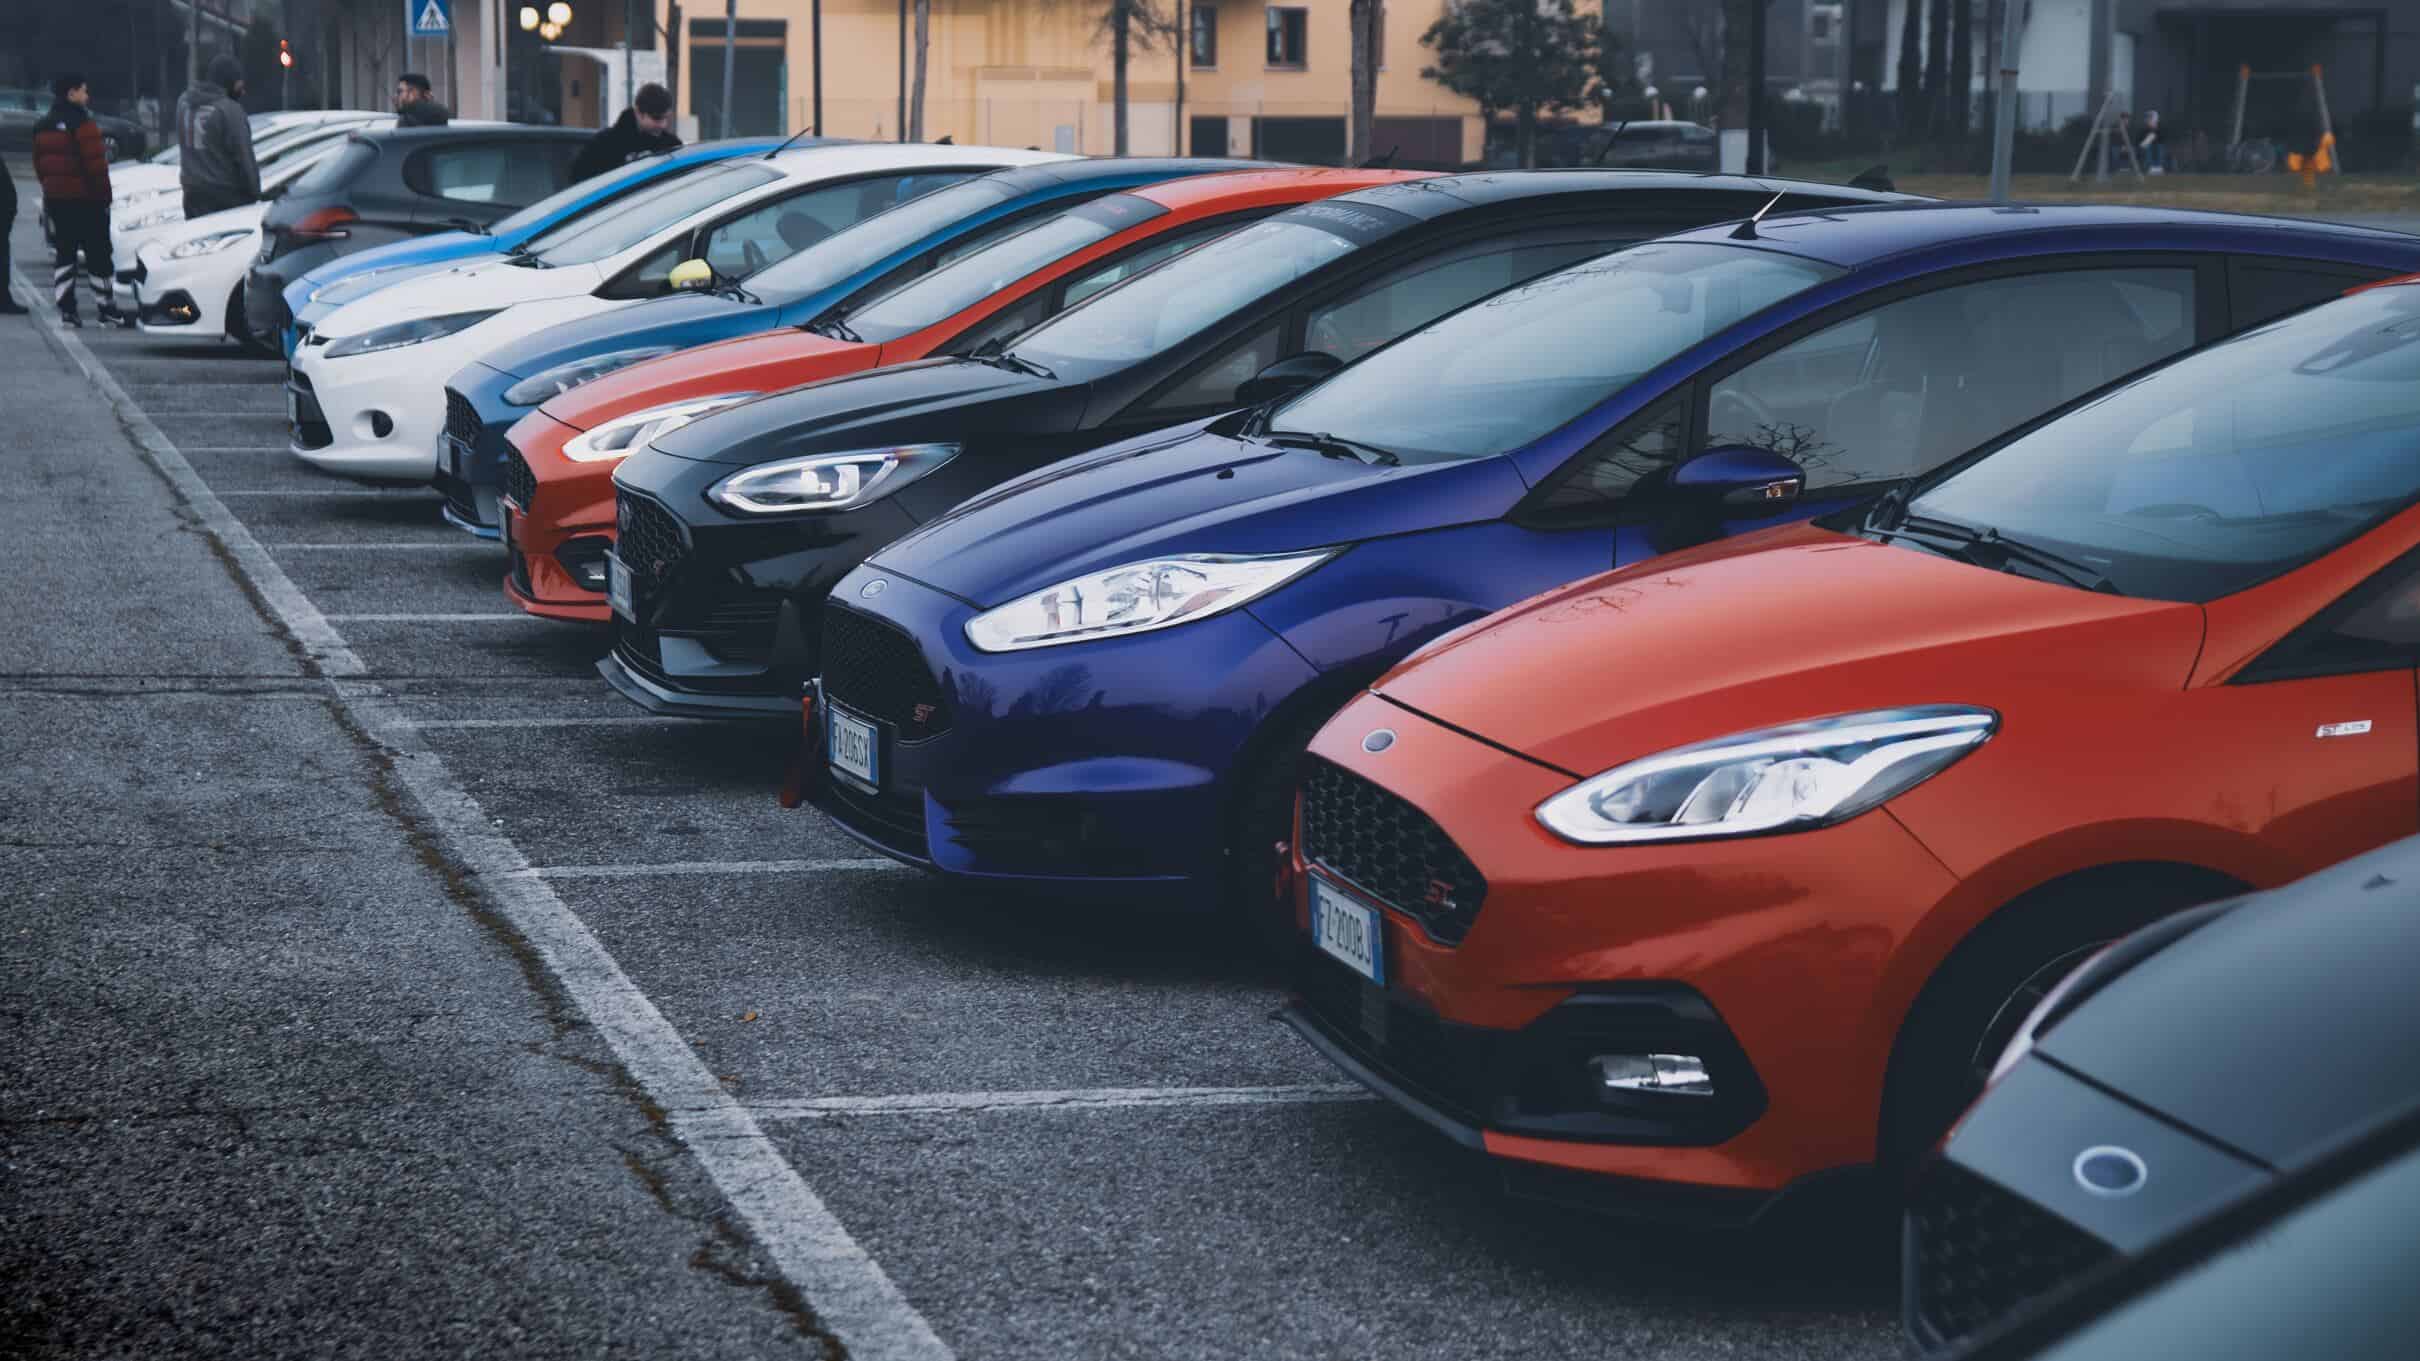 Ford Fiesta lineup - A collection of colorful and versatile hatchbacks.

